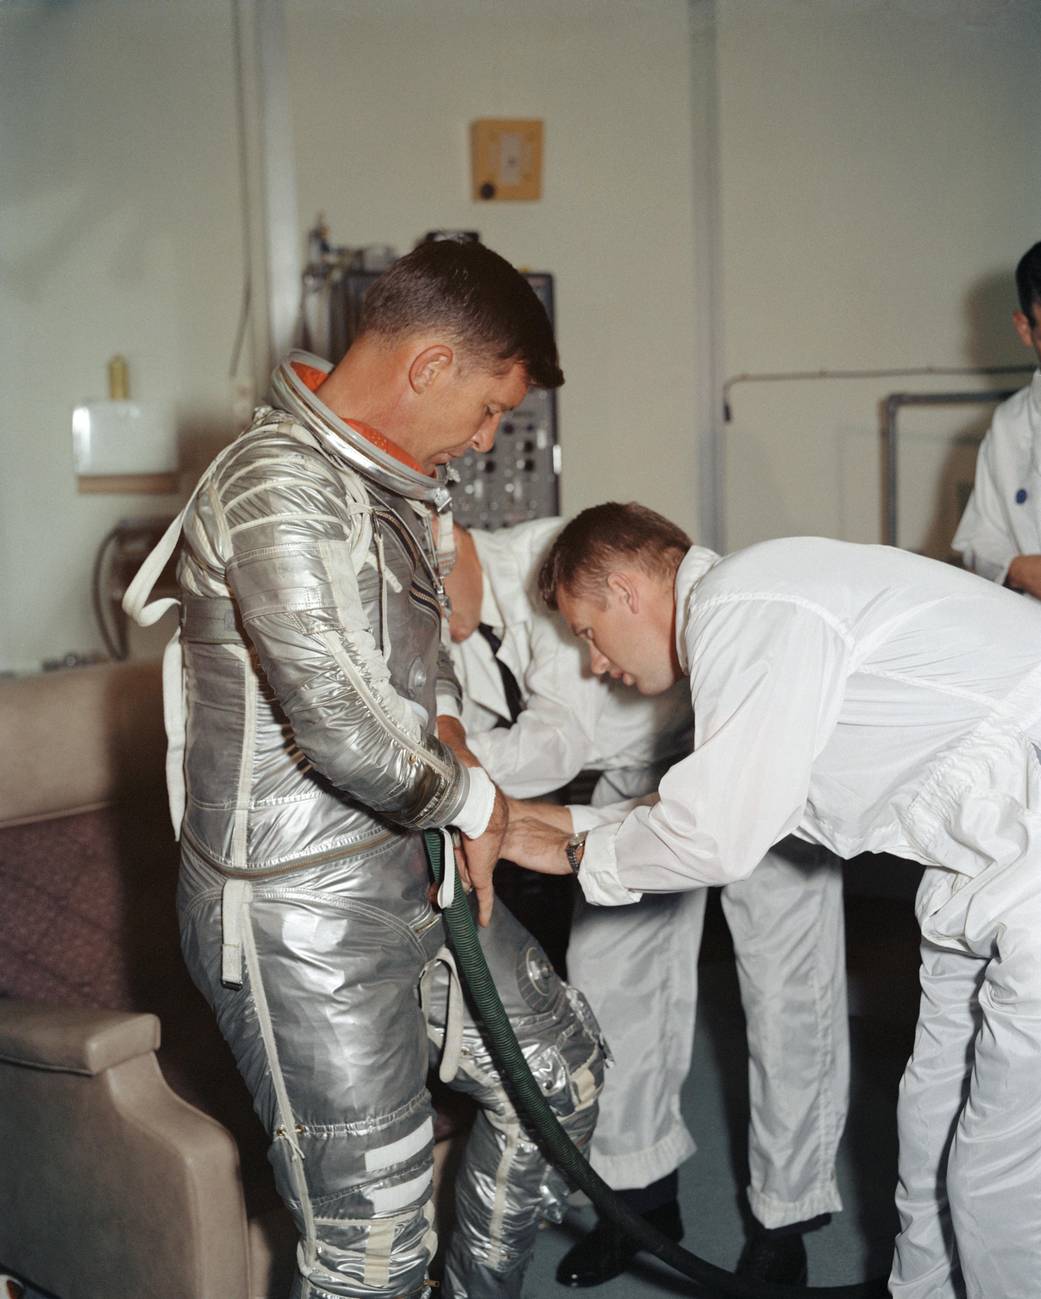 Astronaut in silver Mercury spacesuit without helmet as spacesuit is checked by technician